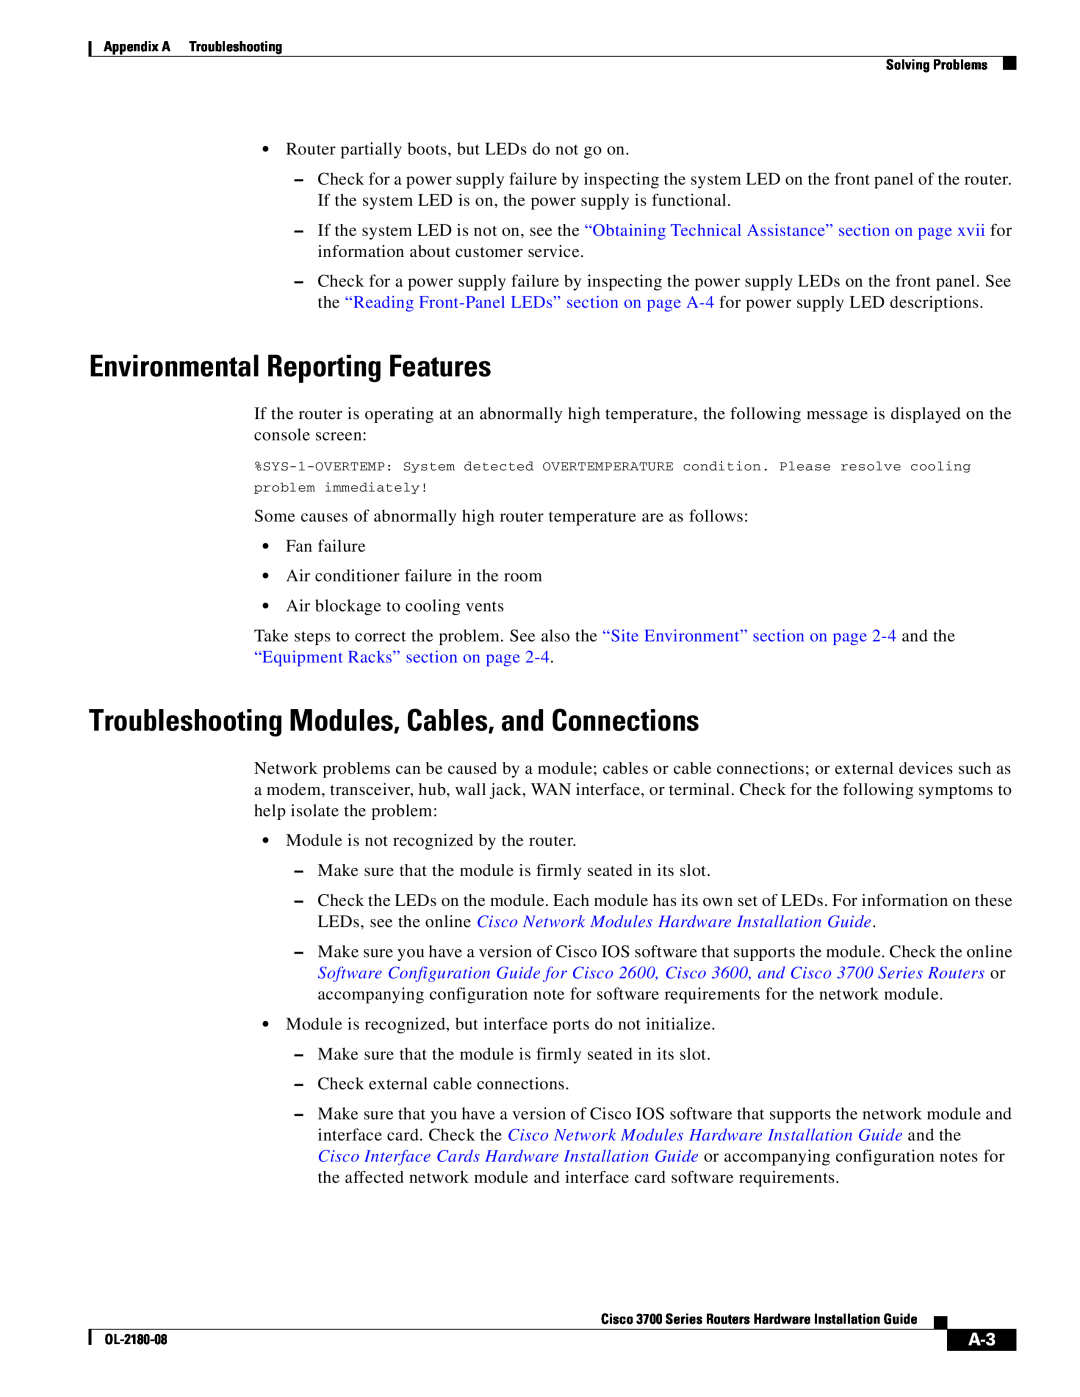 Cisco Systems 3700 Series manual Environmental Reporting Features, Troubleshooting Modules, Cables, and Connections 